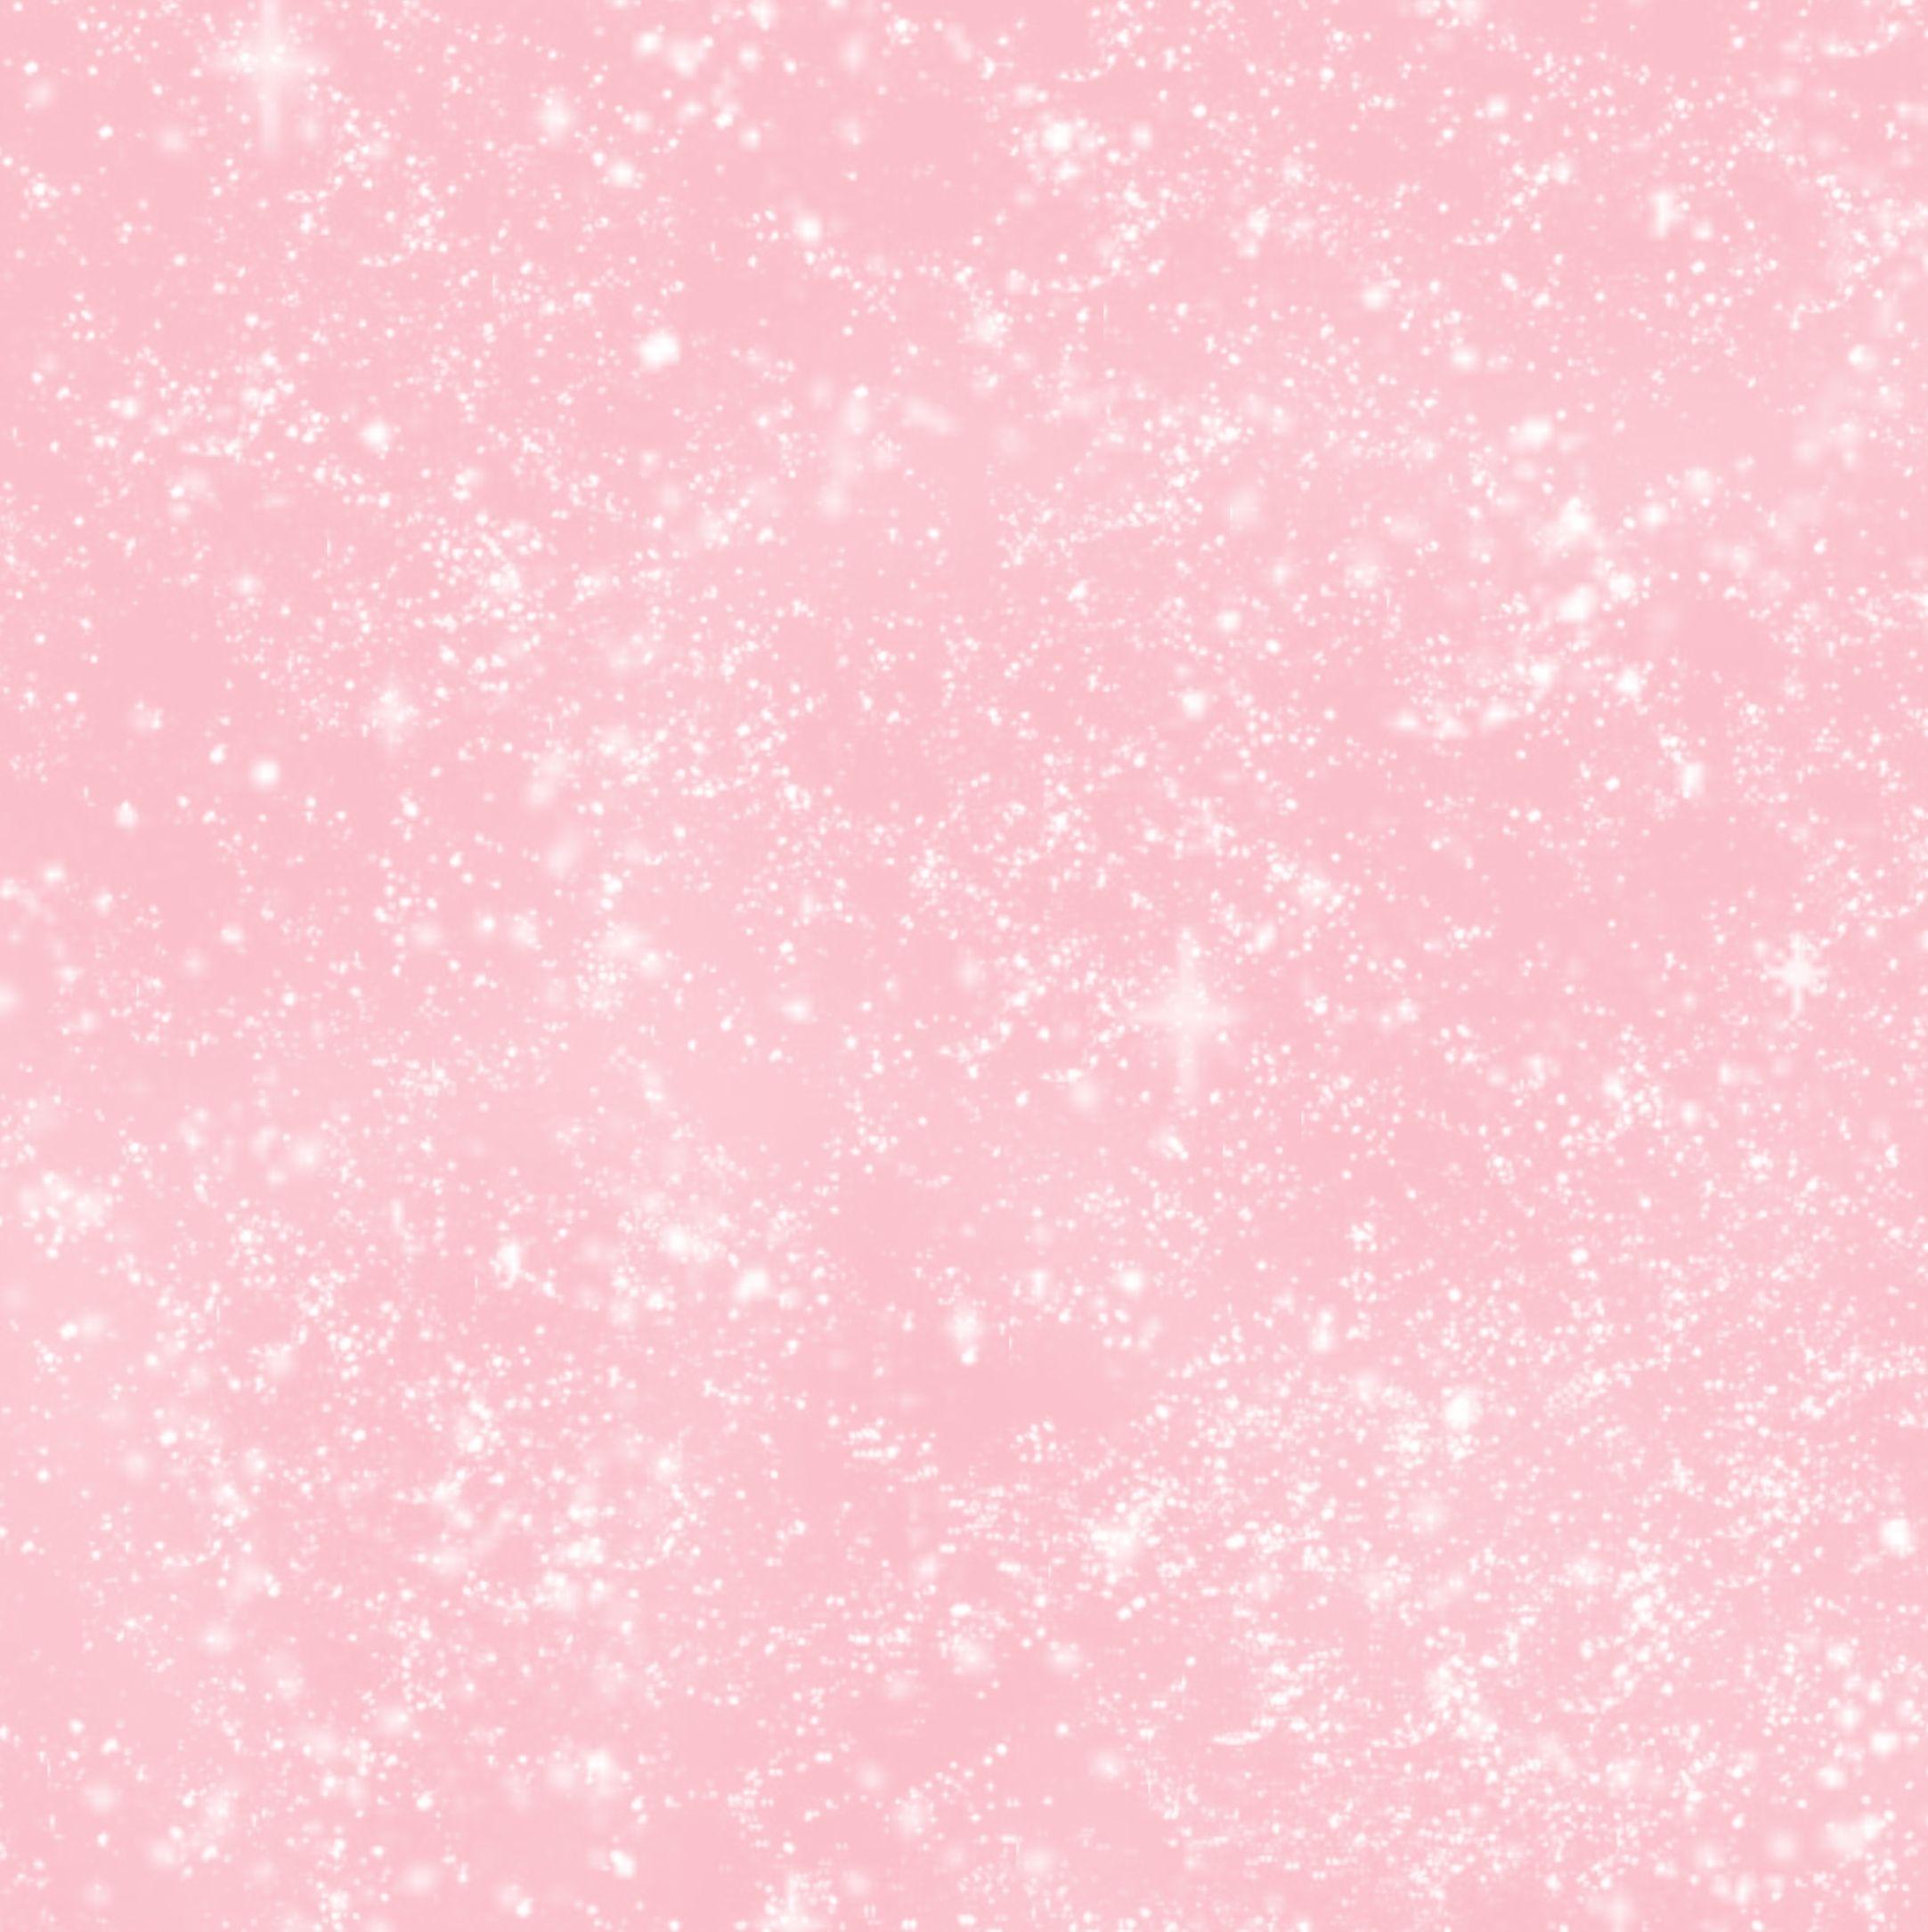 Soft Pink Backgrounds - Wallpaper Cave